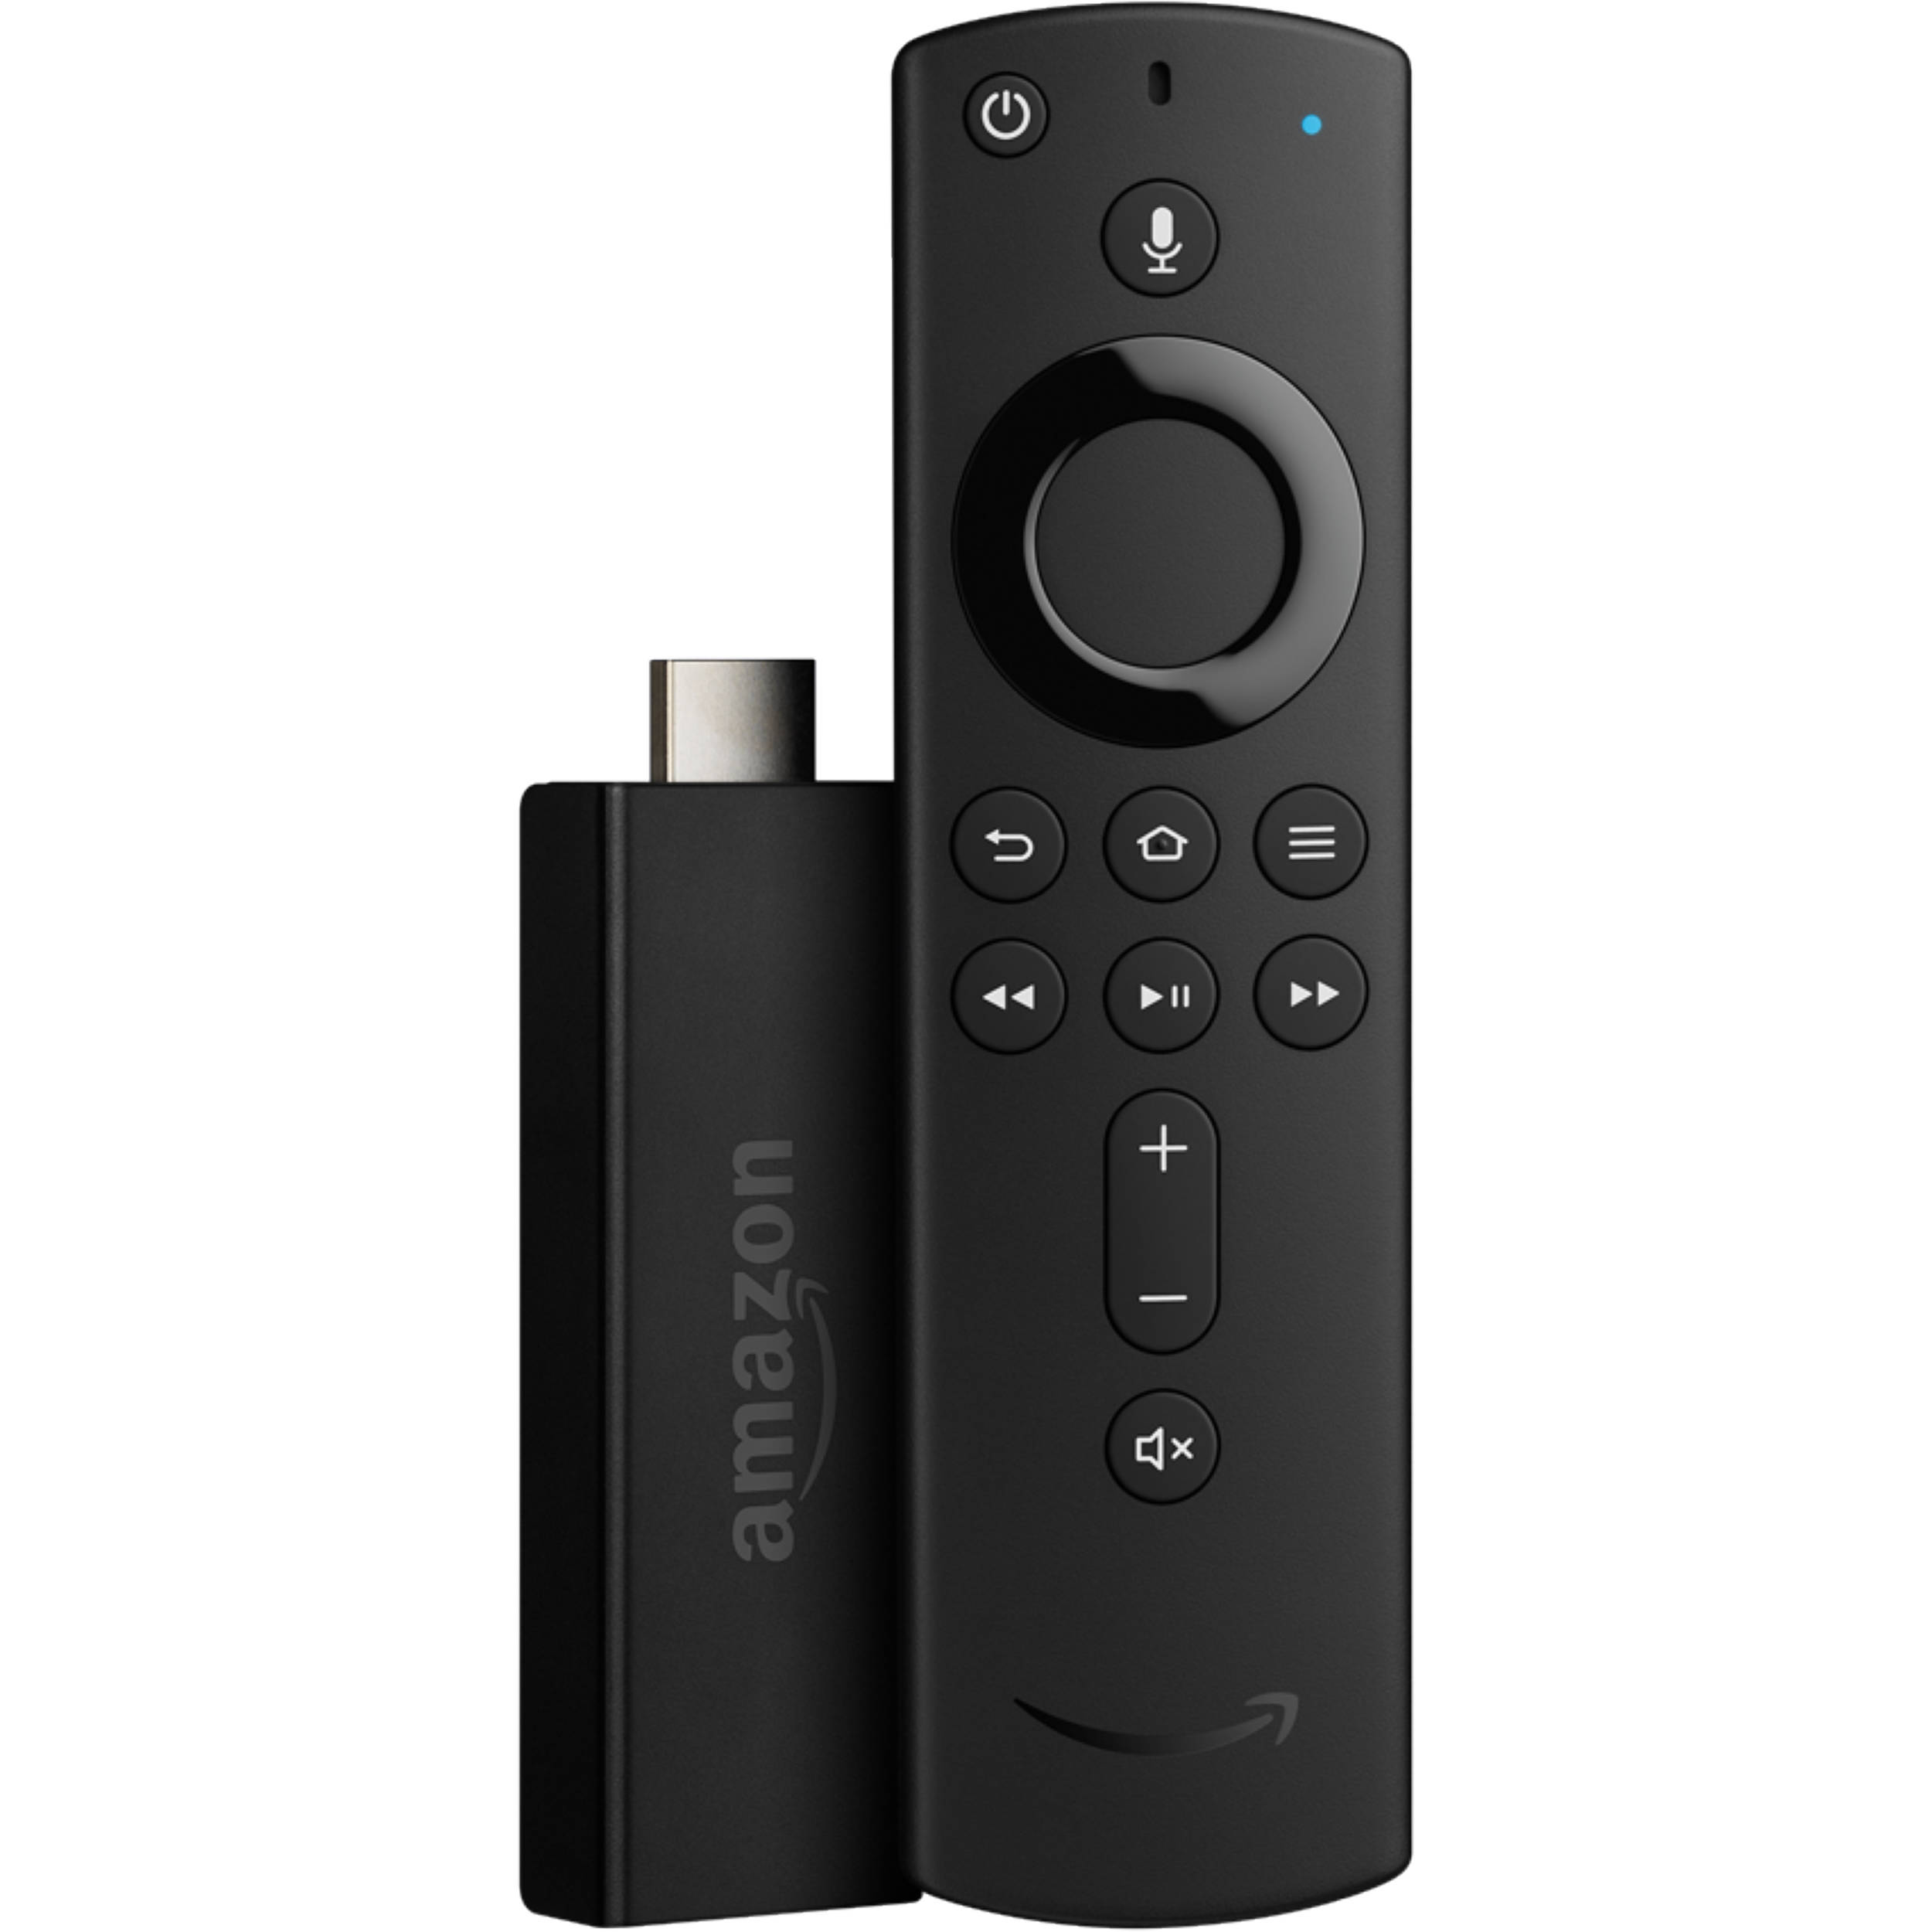 remote that works on any tv